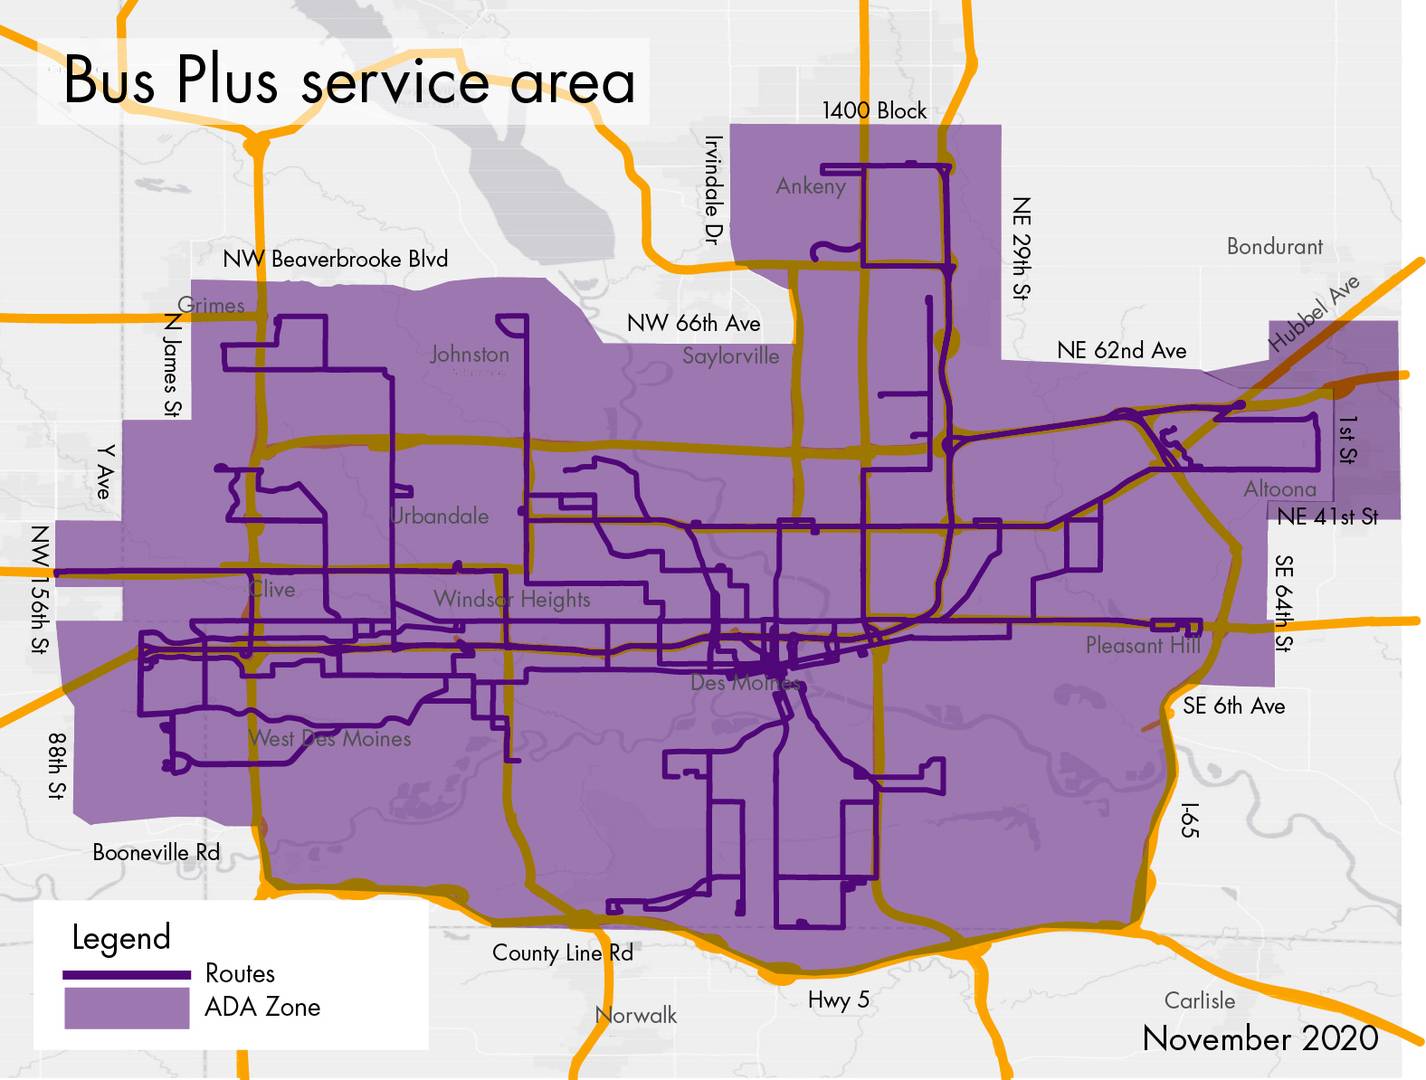 Map of the Bus Plus service area from November 2020.